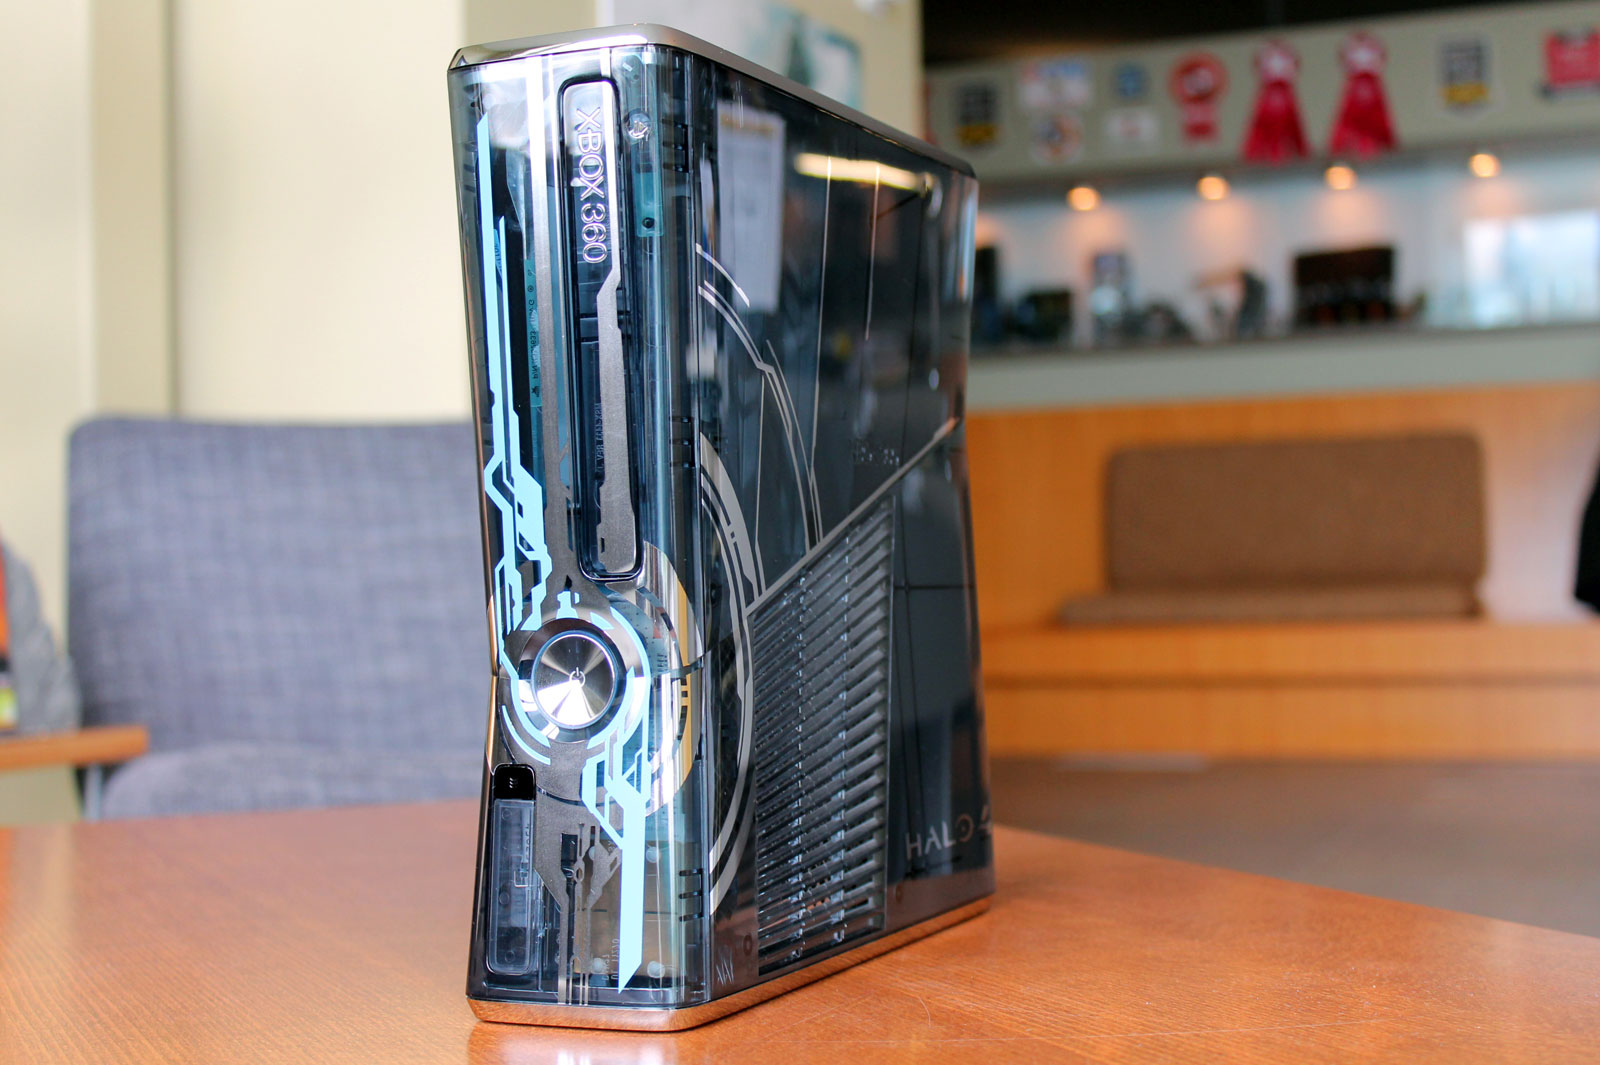 halo 4 limited edition xbox 360